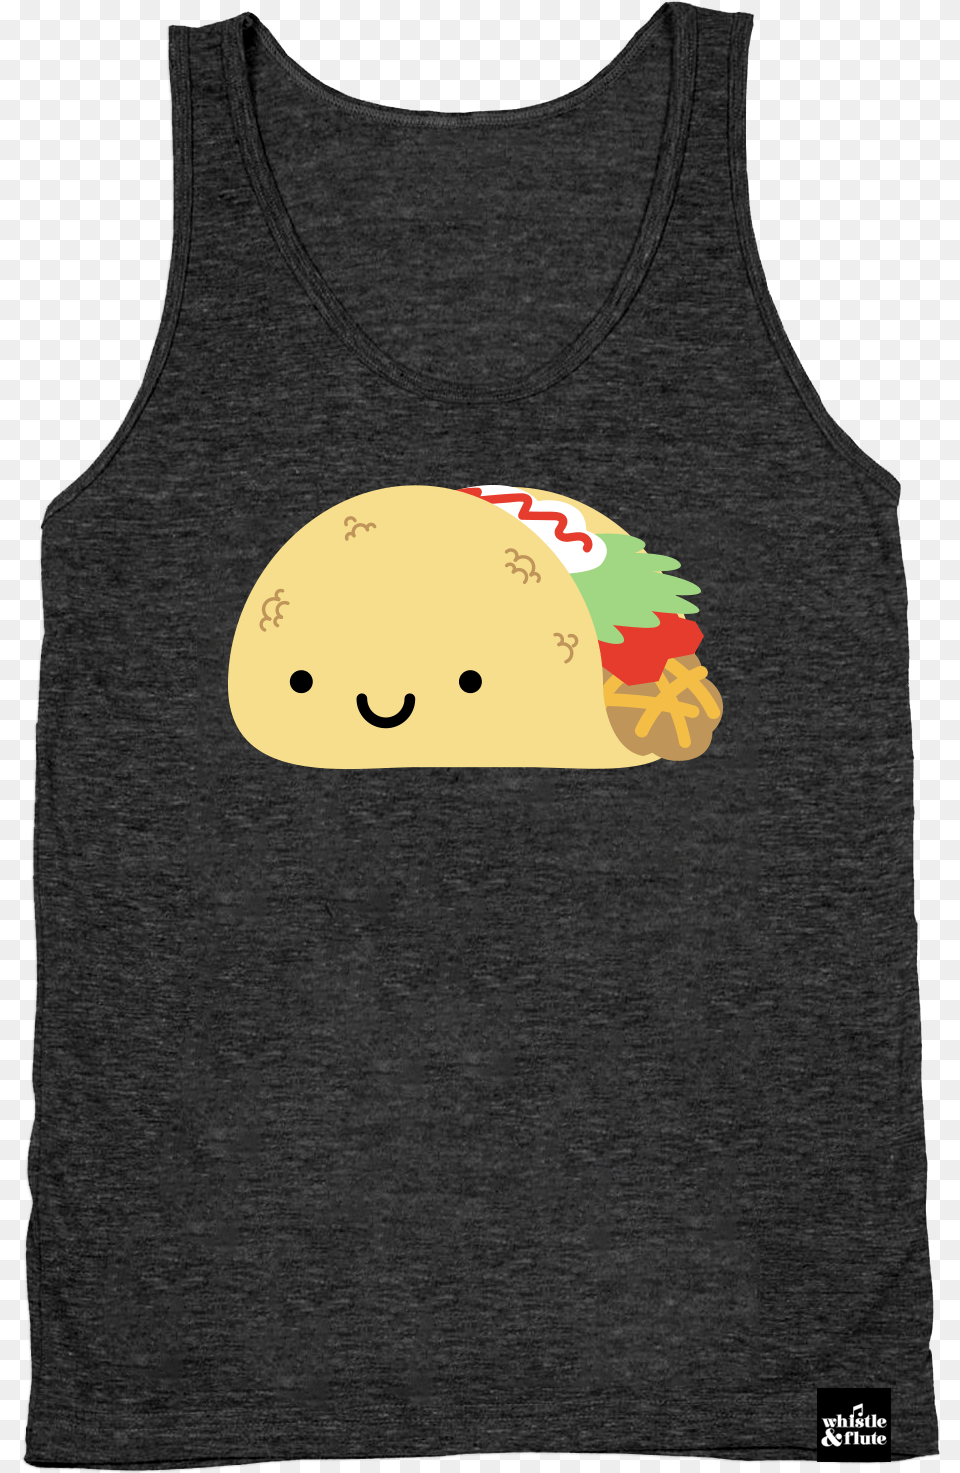 Whistle And Flute Tank Top, Clothing, Tank Top, Person Png